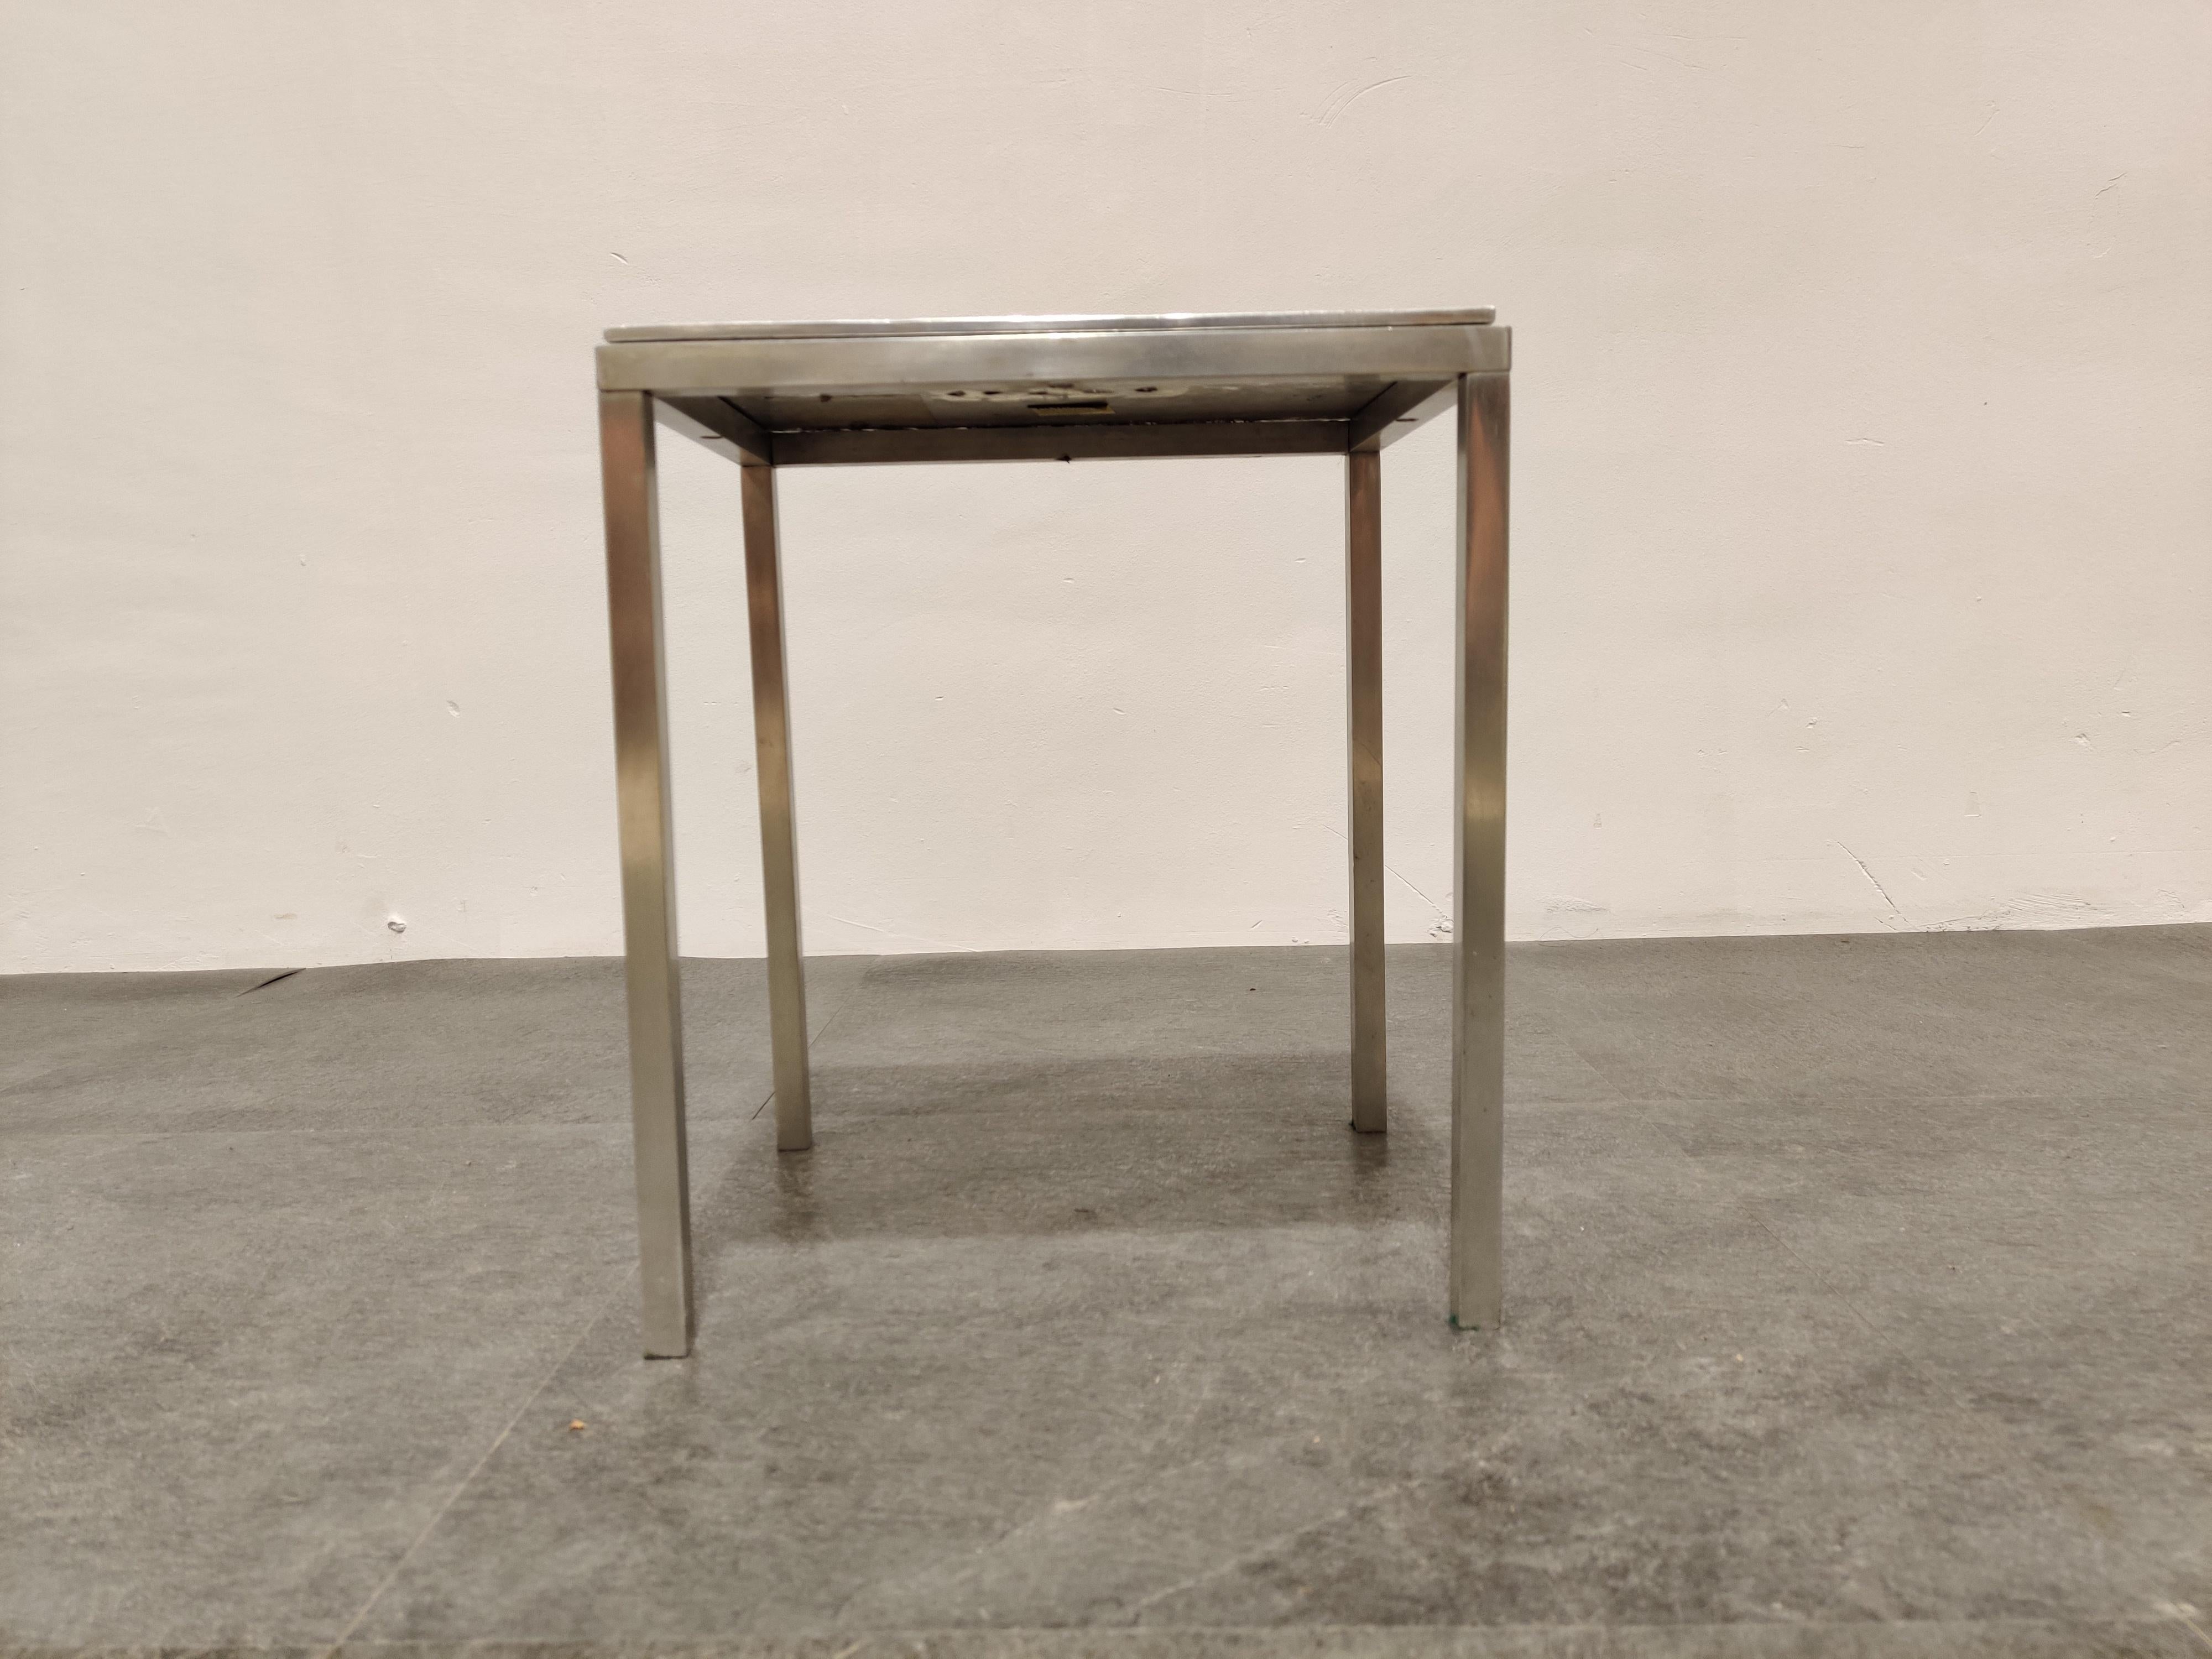 Midcentury side table by Willy Luyckx for Aluclair.

Hand forged table top.

Labeled underneath.

Cool decorative side table.

1970s - Belgium

Good condition

Measures: Height 35cm/13.77